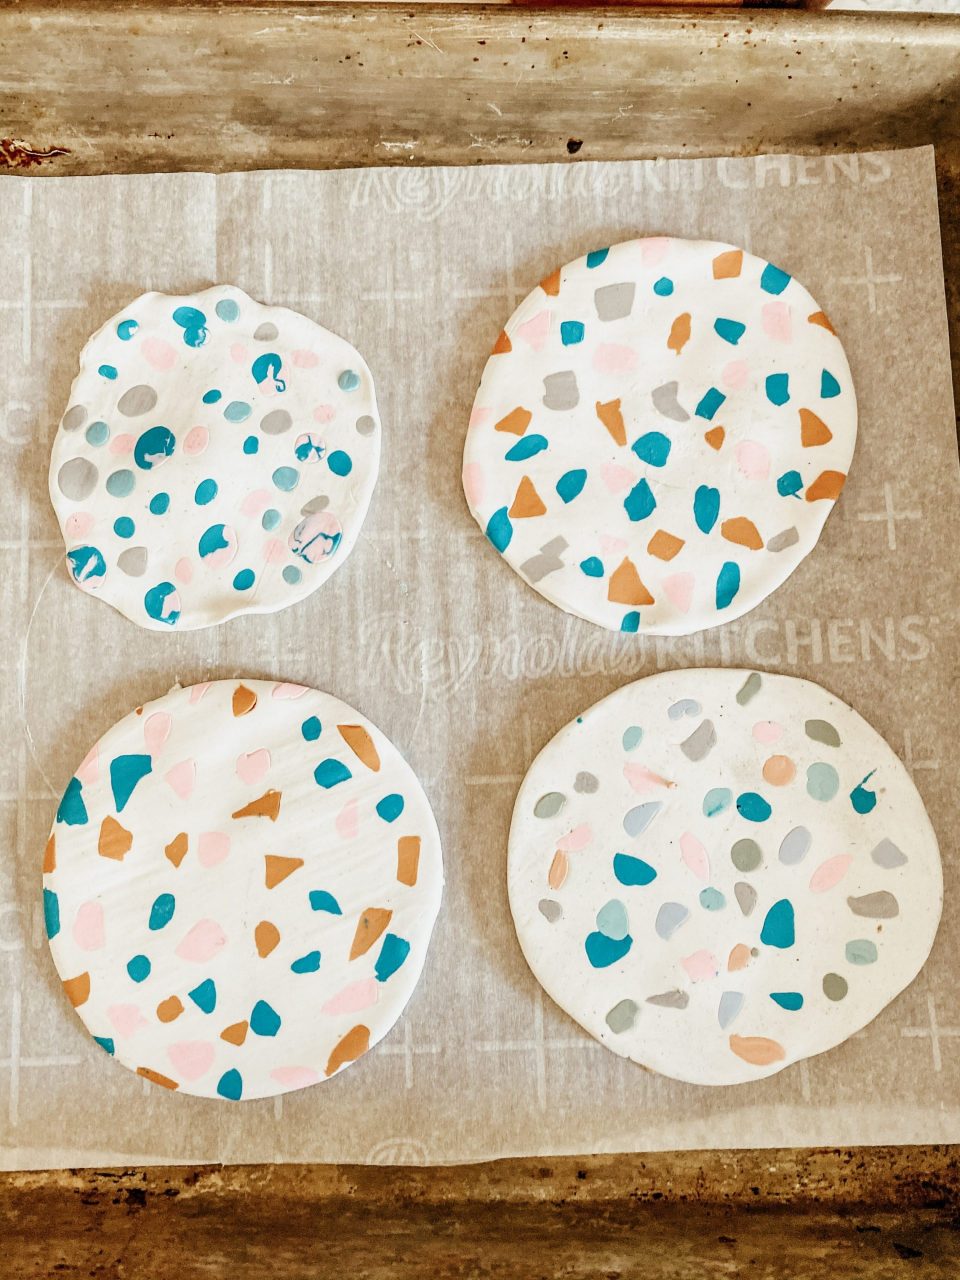 4 completed terrazzo coasters, and you can tell whose is whose!